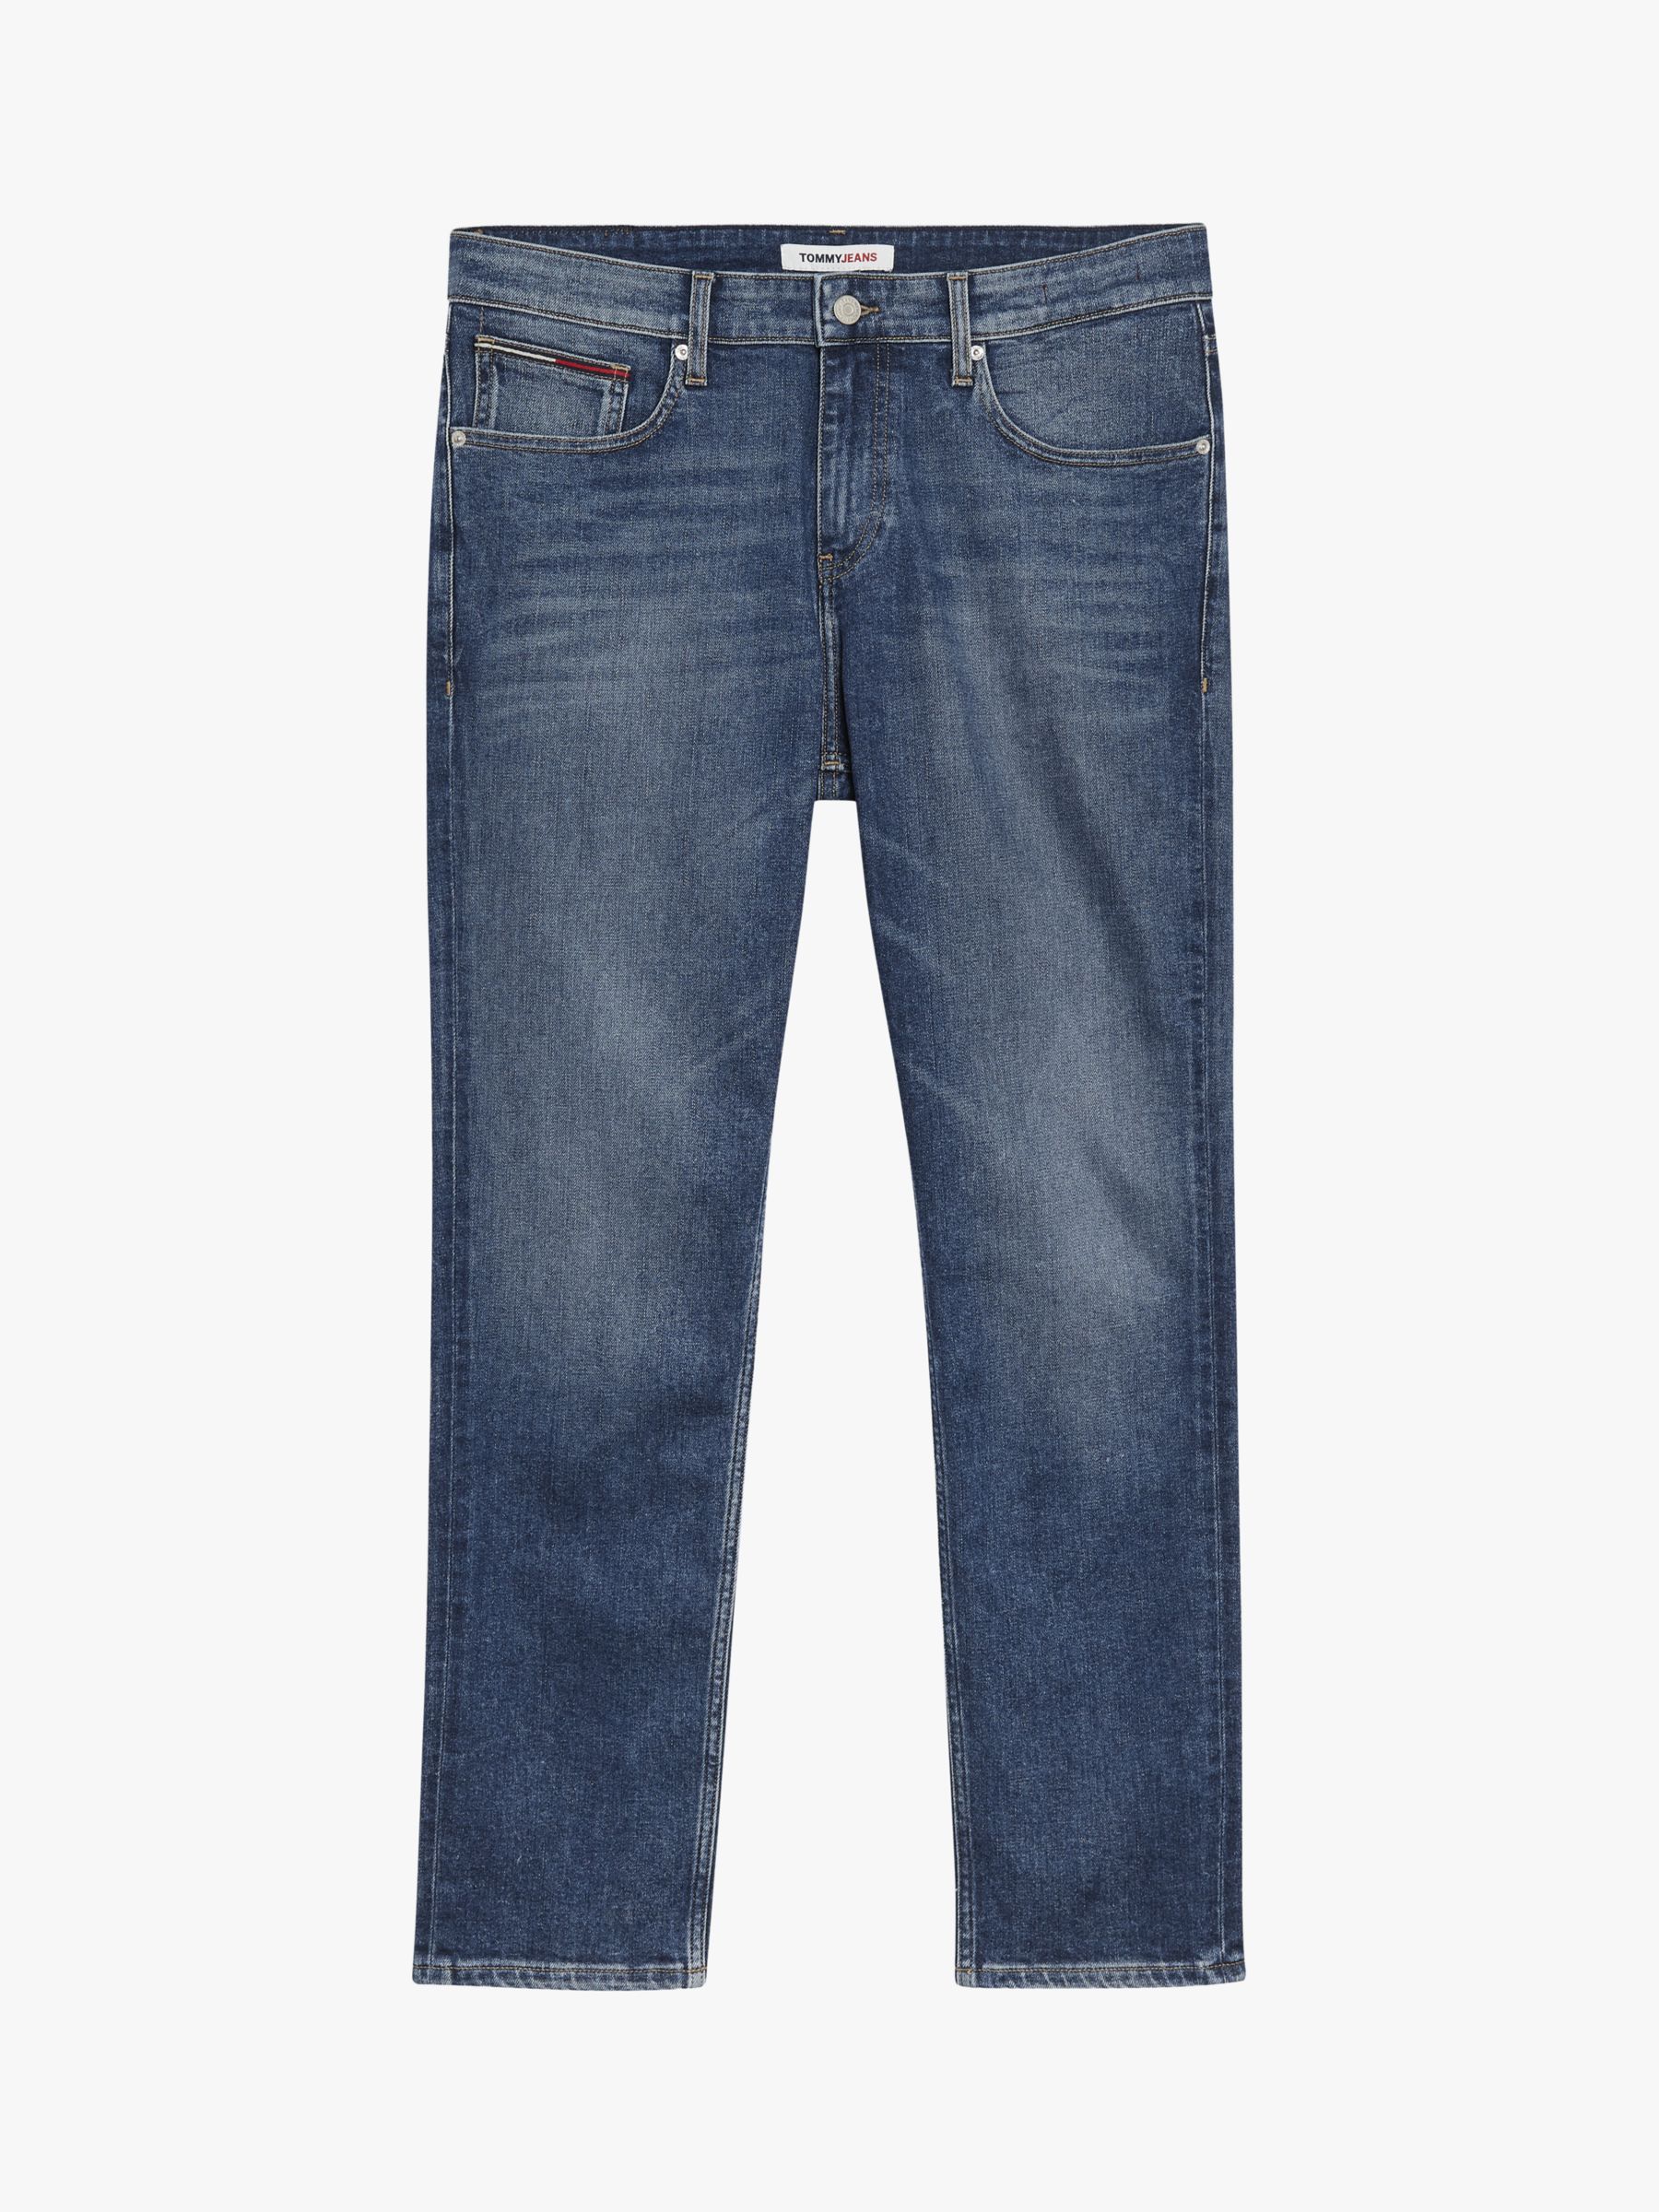 Tommy Jeans Original Ryan Straight Jeans, Dale DB at John Lewis & Partners